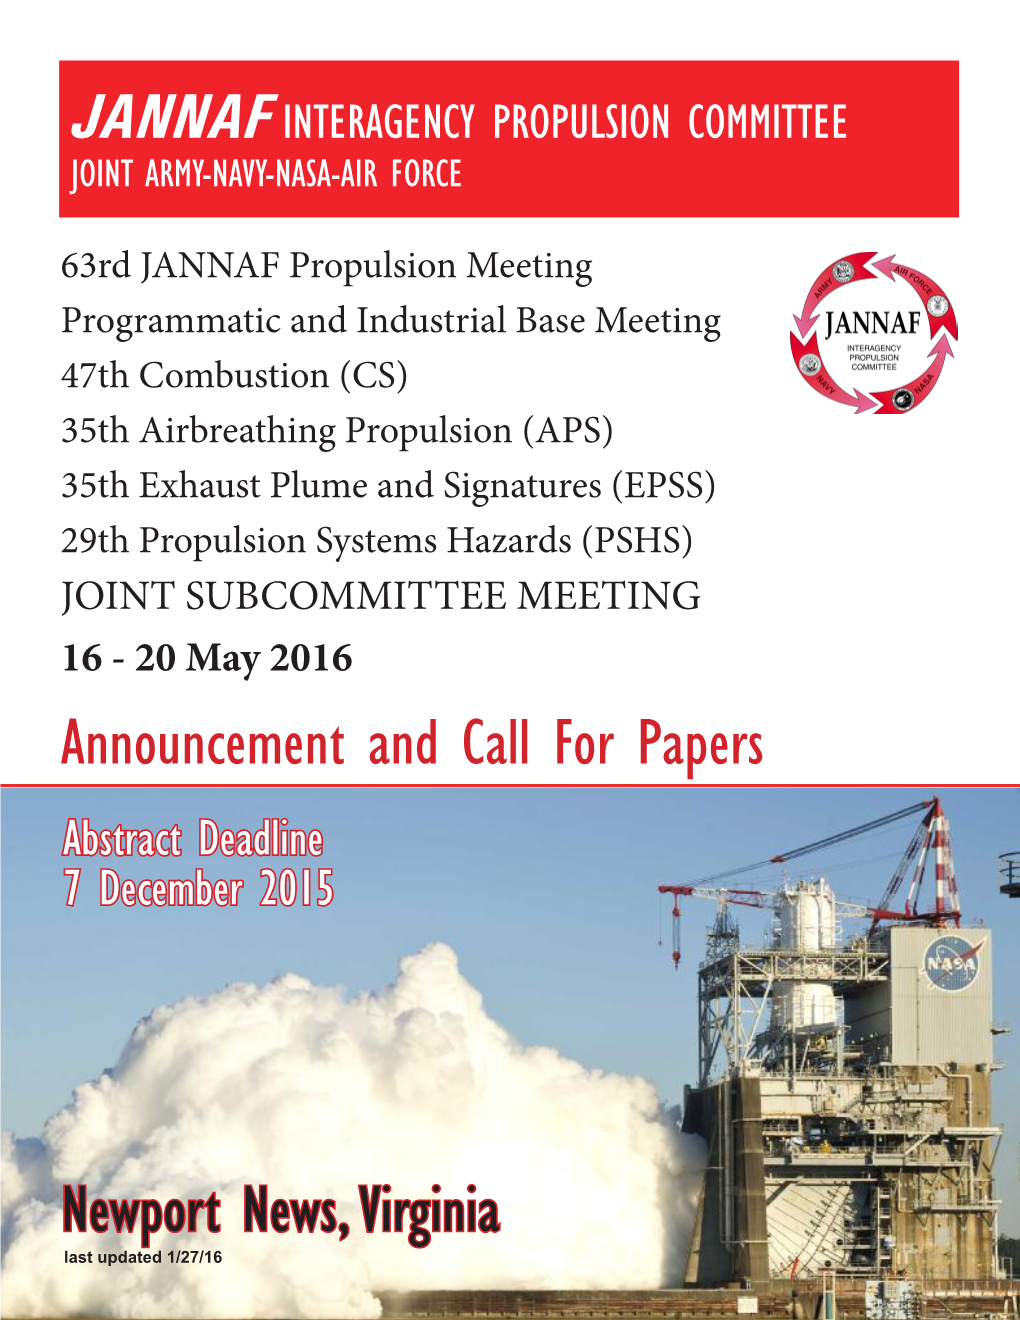 Call for Papers Abstract Deadline 7 December 2015